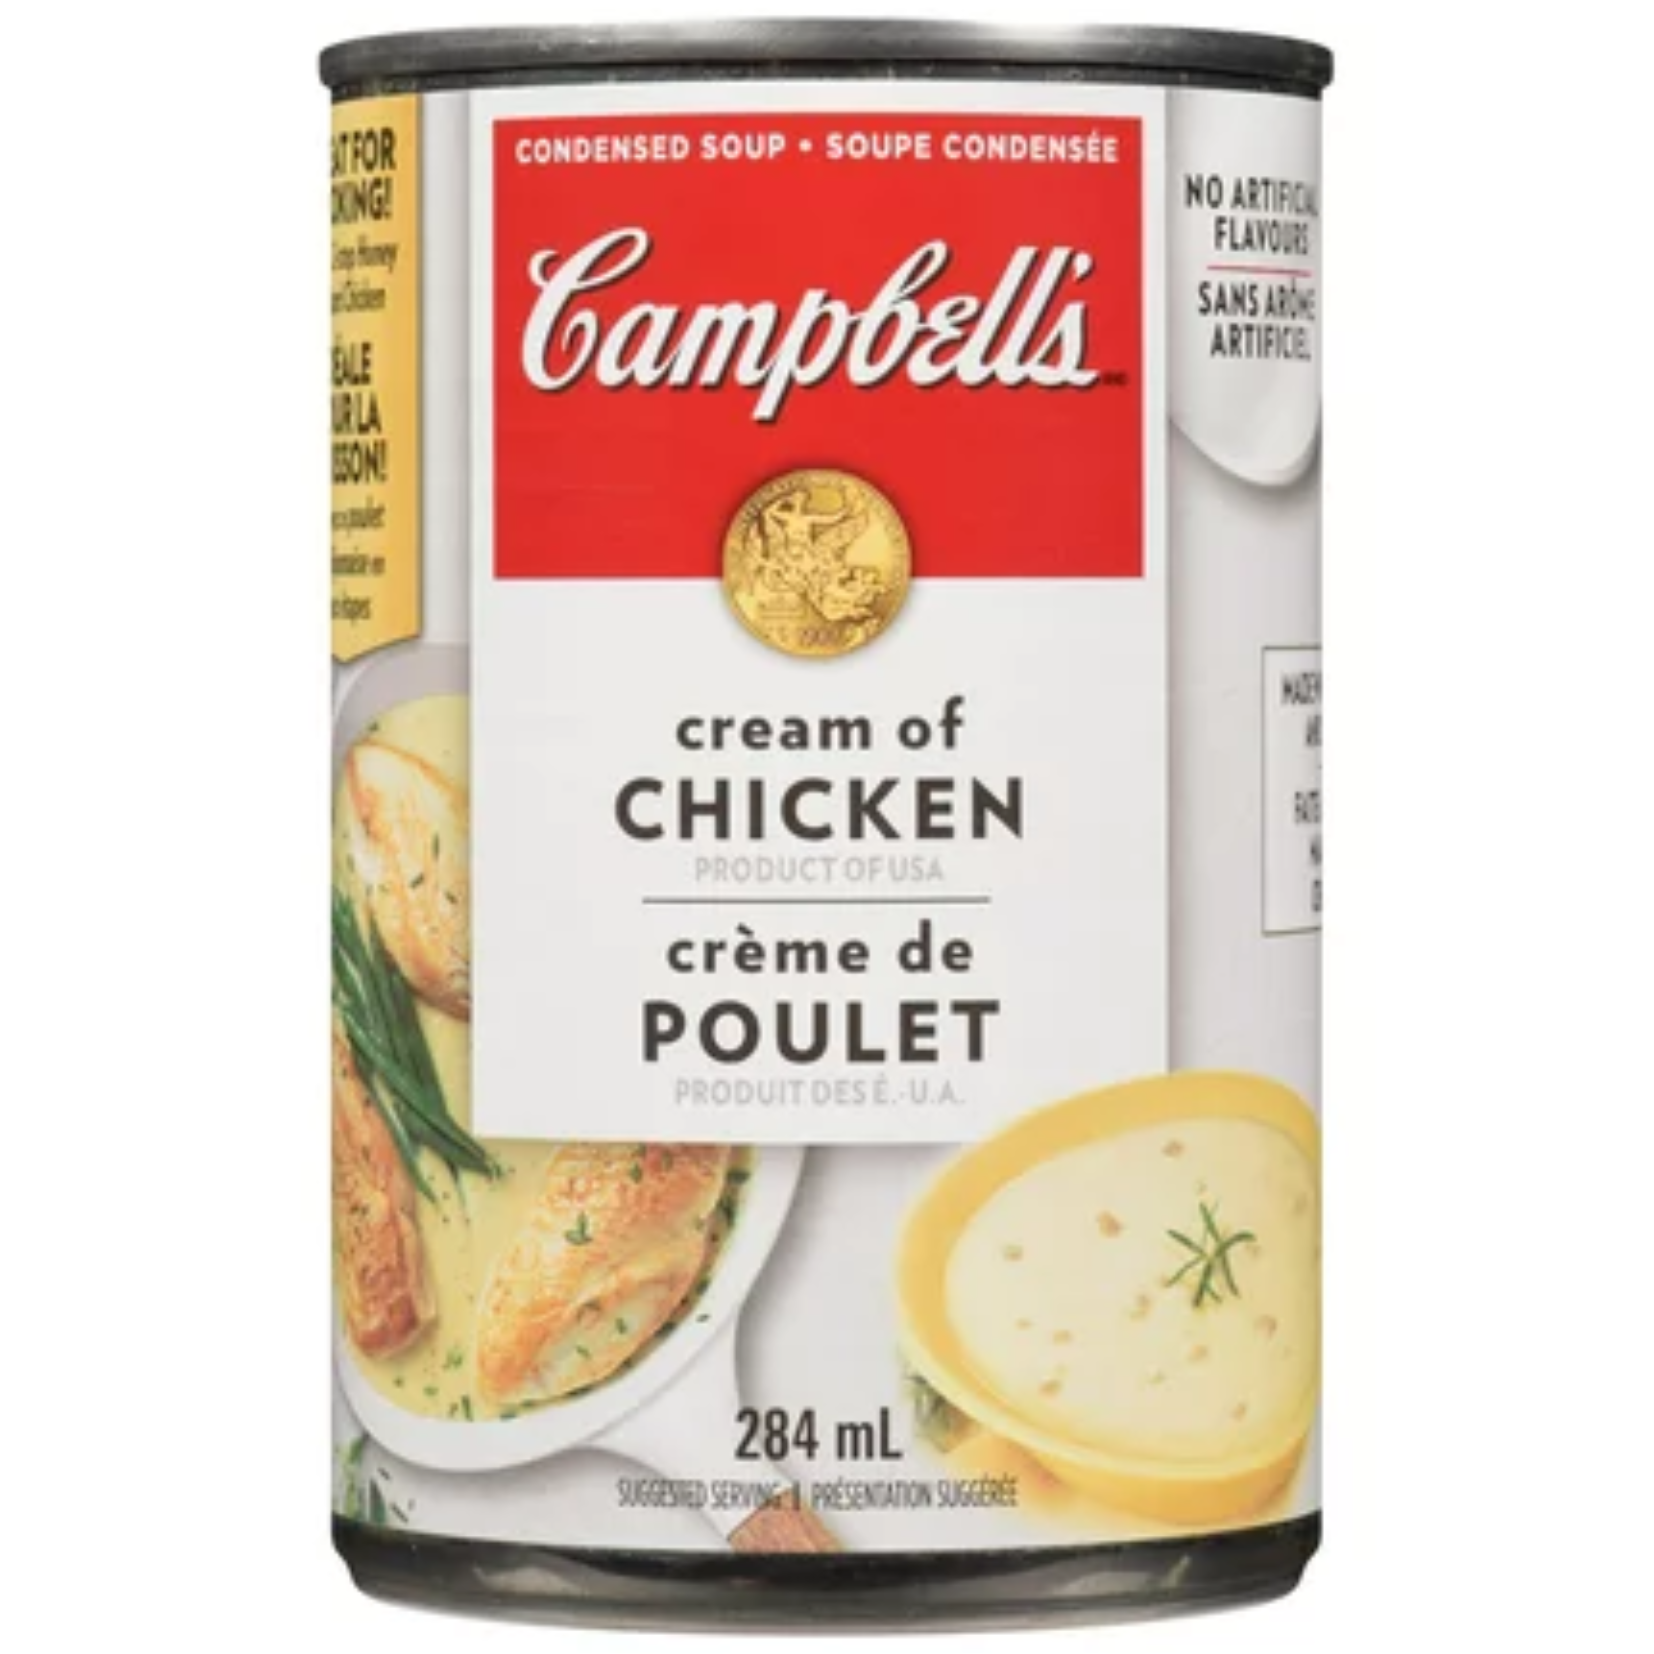 Campbell's Cream Of Chicken Soup 284ml